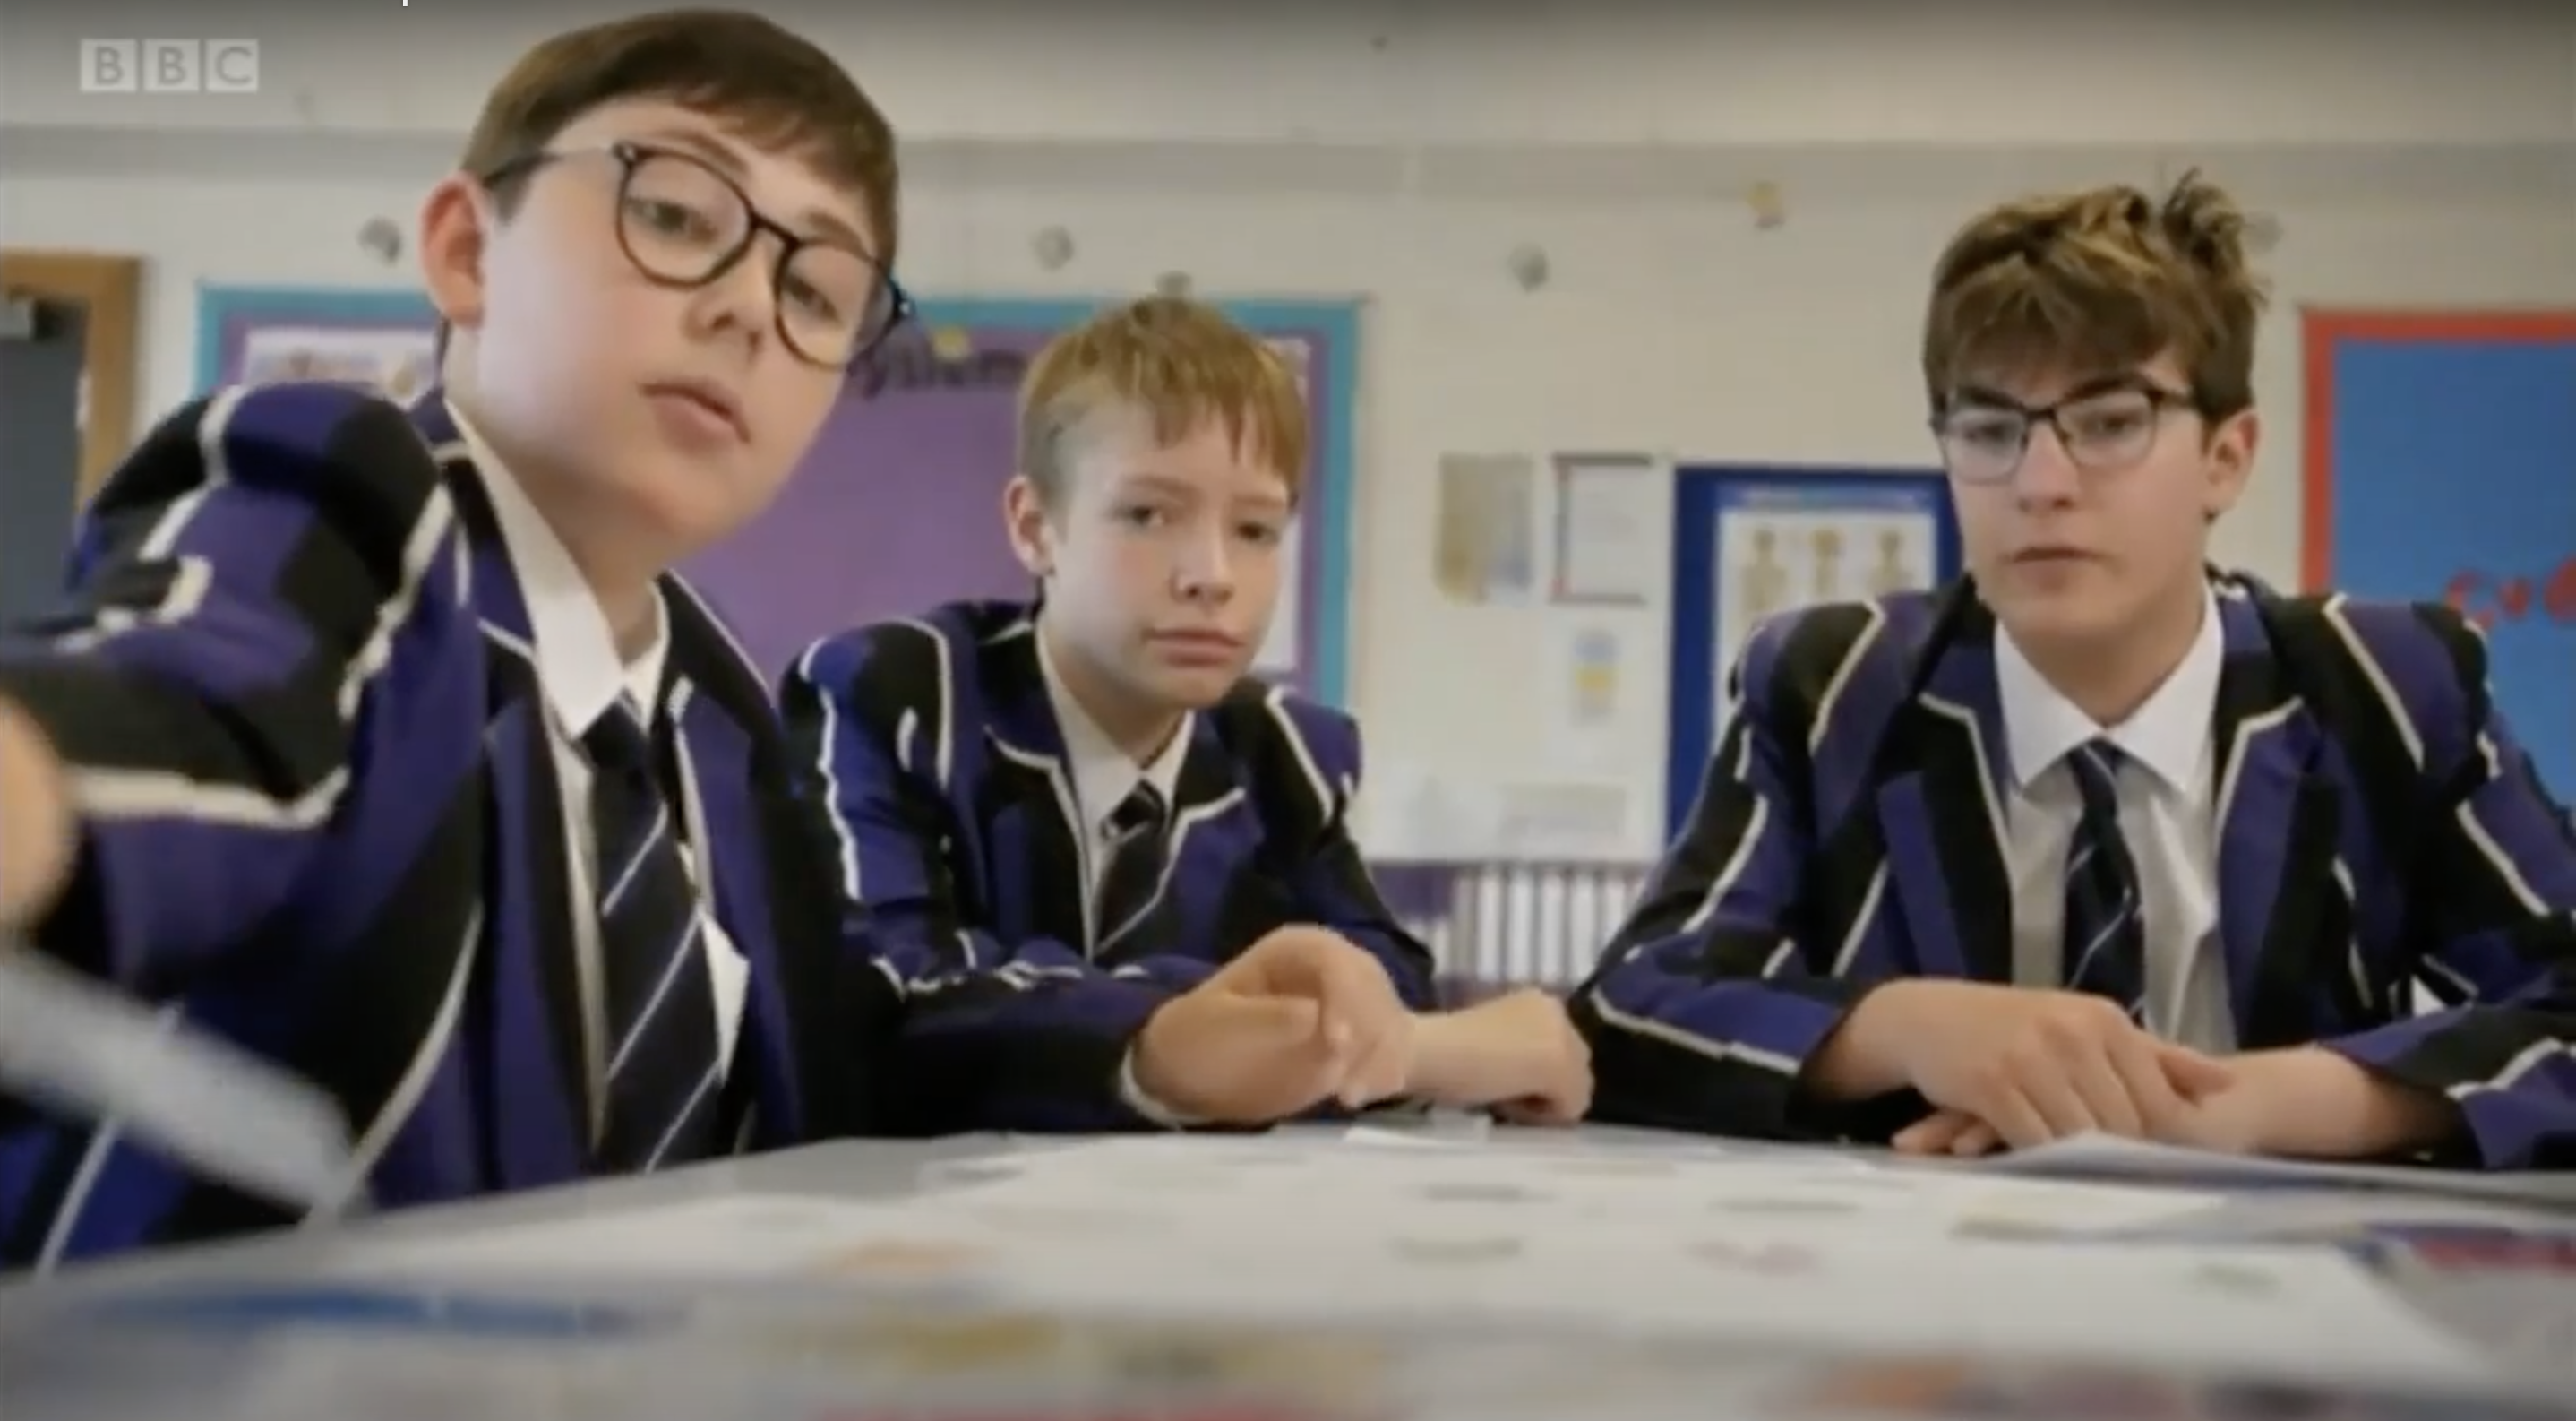 Image: Alistair Outram, Filip Pekala and Tom Sumpton, Year 9 students from Kimbolton School, Cambridgeshire sharing the news of their new game on BBC Look East